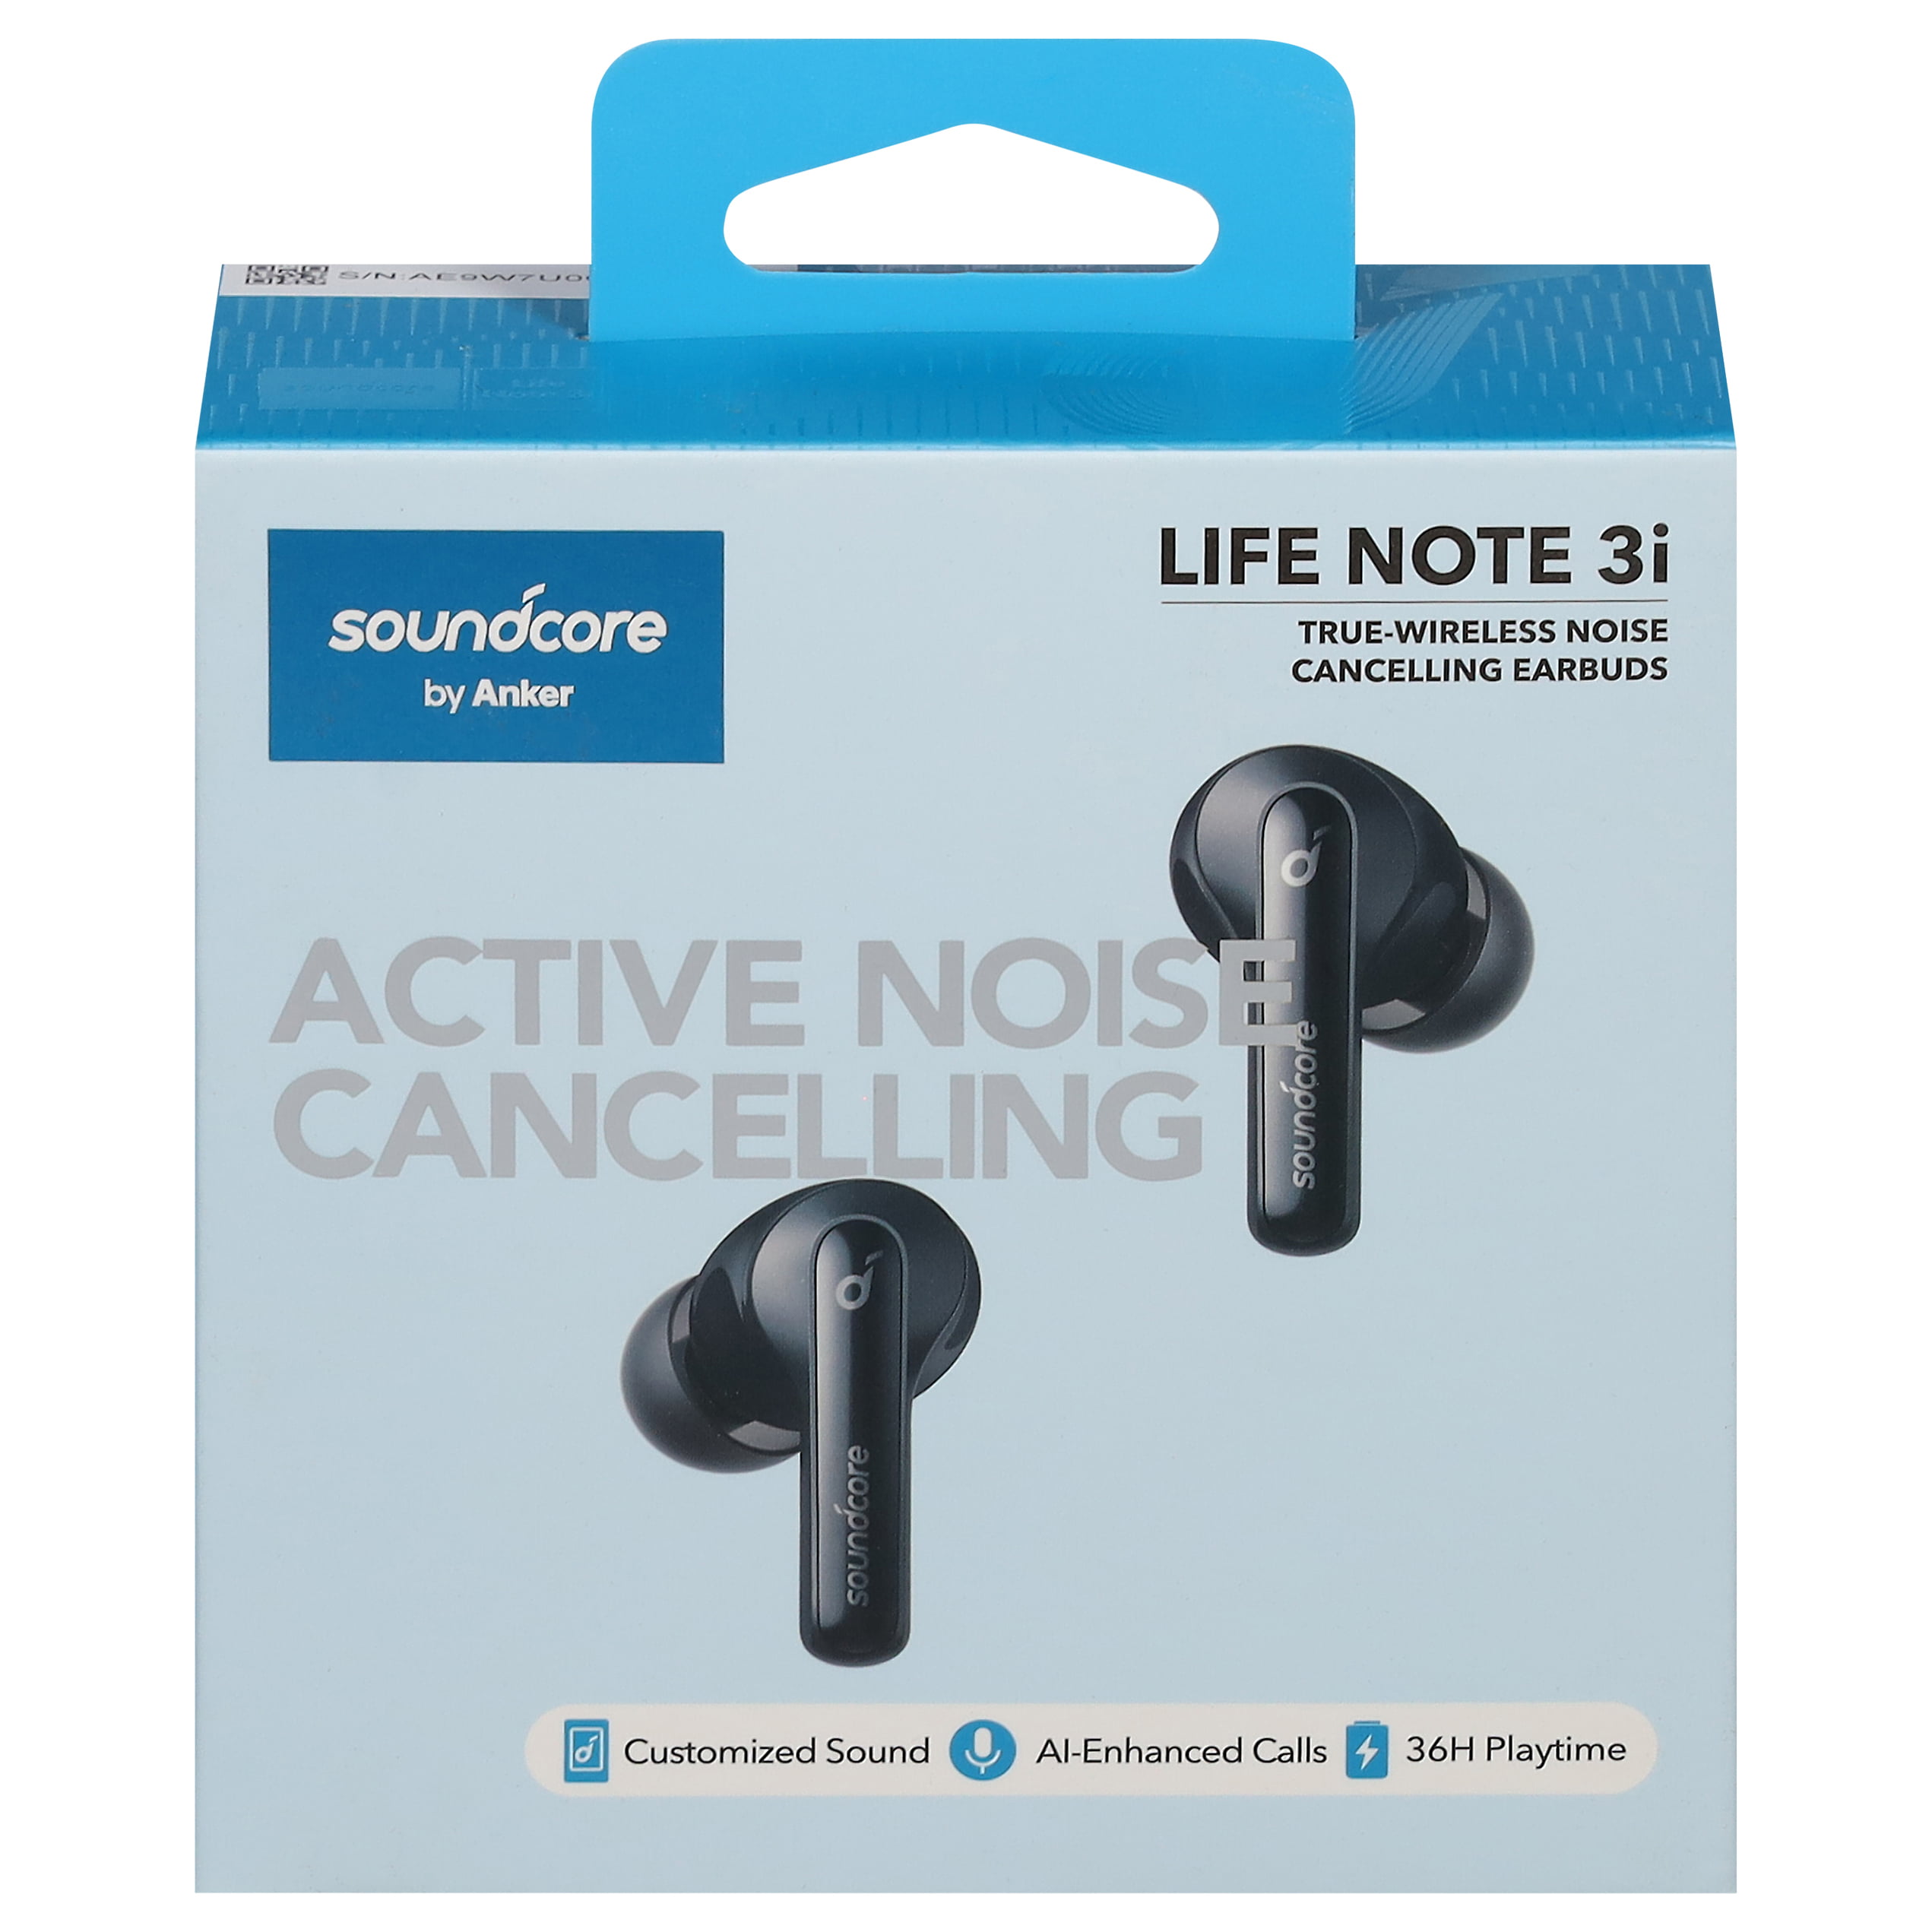 Note Wrls Life Anker Cancel + Mic 3i Soundcore Noise A3983Z11 Soundcore Earbuds Tws W/